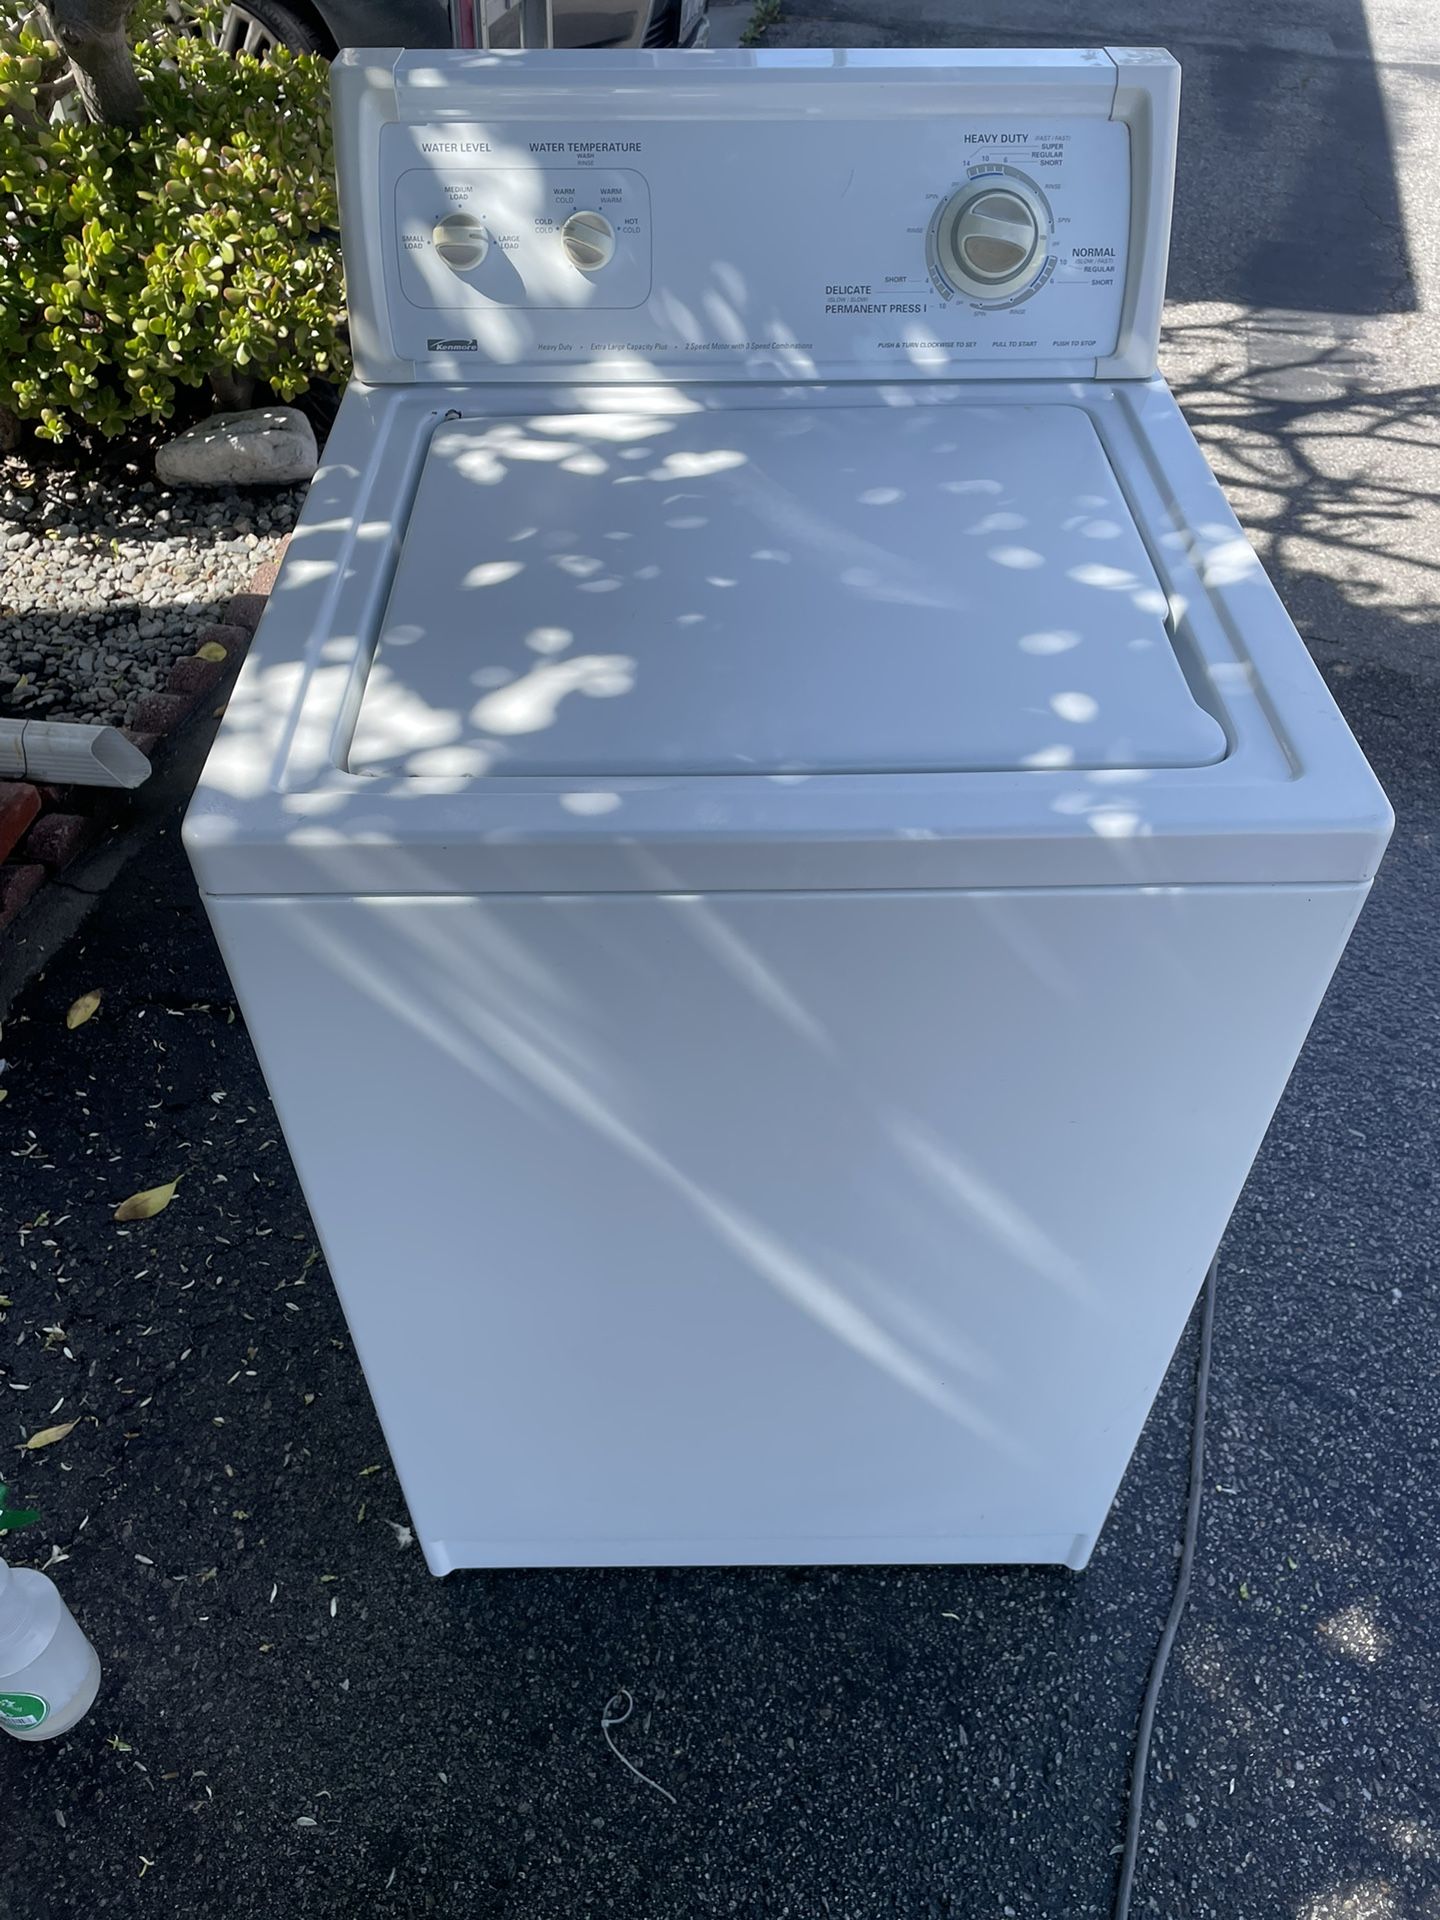 24” Kenmore Washer Good Conditions 